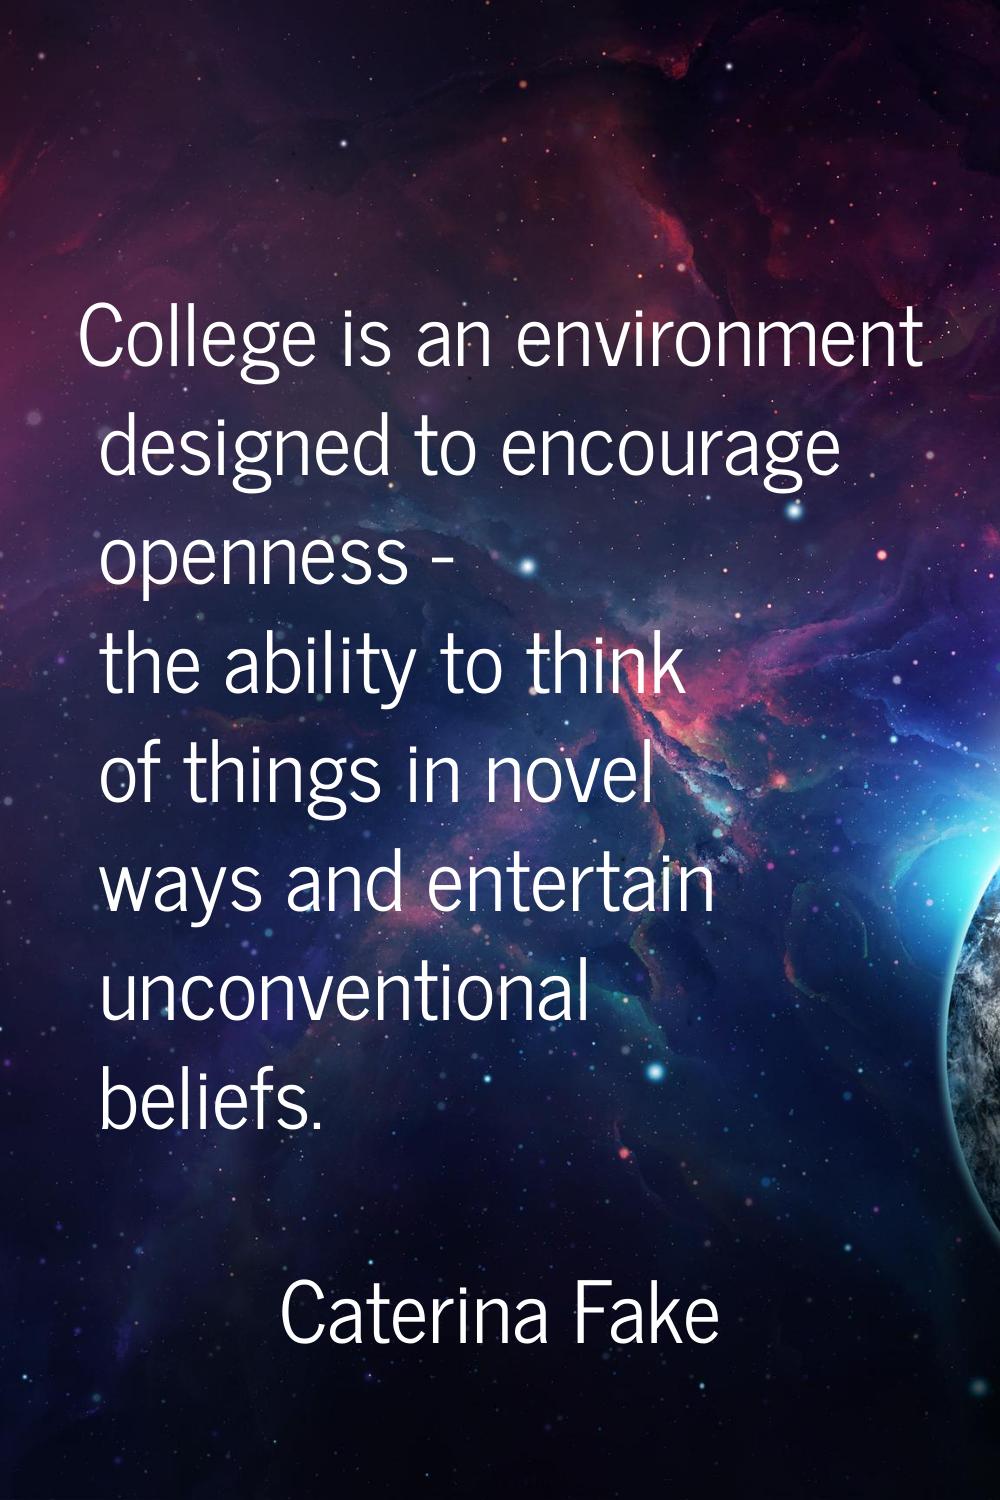 College is an environment designed to encourage openness - the ability to think of things in novel 